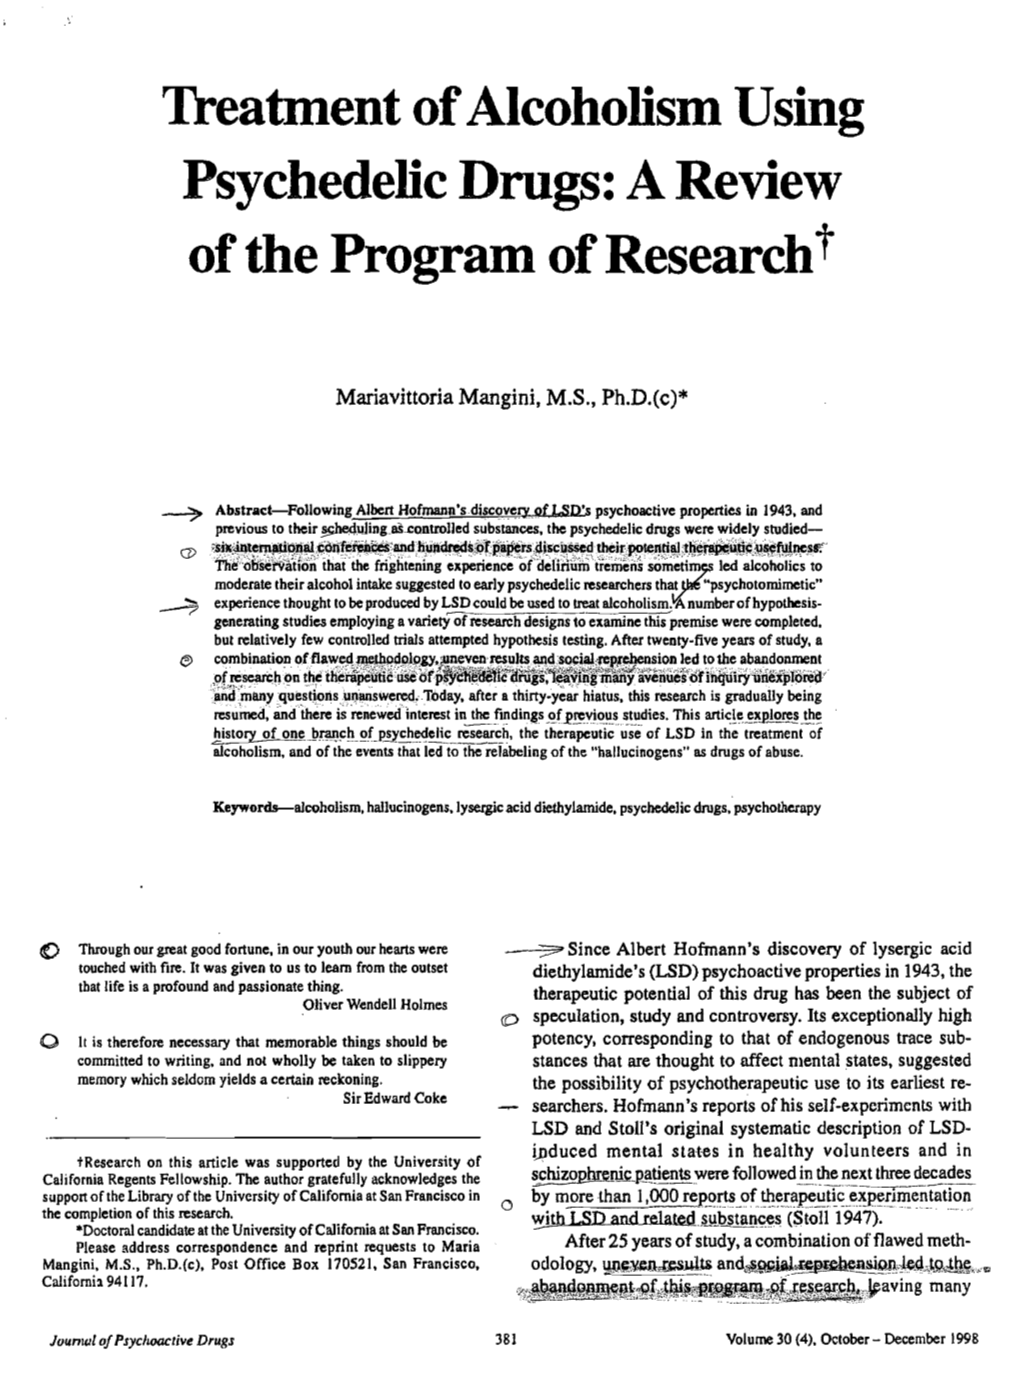 Treatment Ofalcoholism Using Psychedelic Drugs: a Review of the Program of Researcht